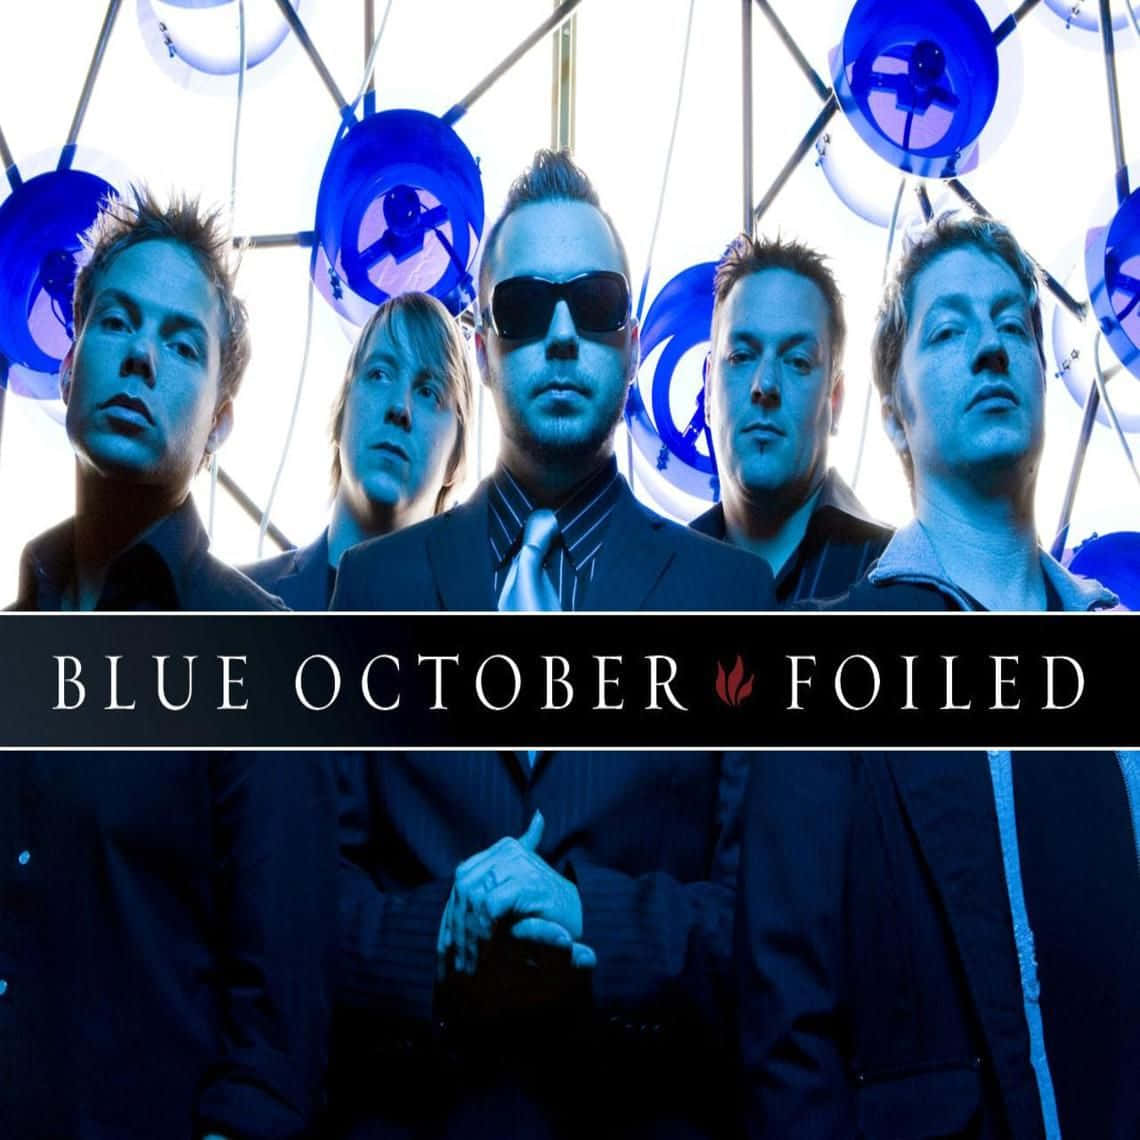 Experience the Beauty of Blue October. Wallpaper